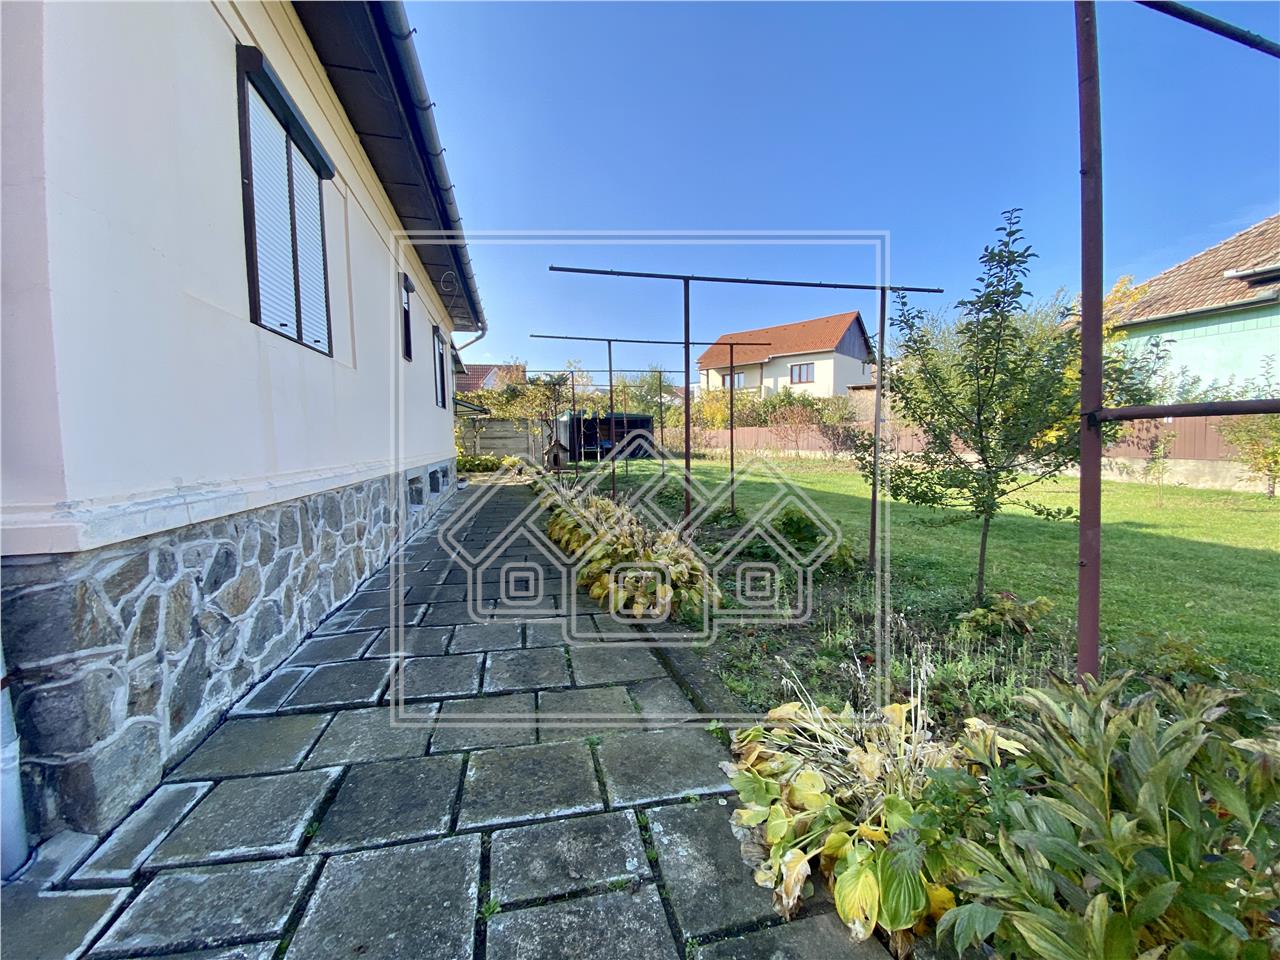 House for sale in Sibiu - 4 rooms, 1000 sqm land - C. Poplacii